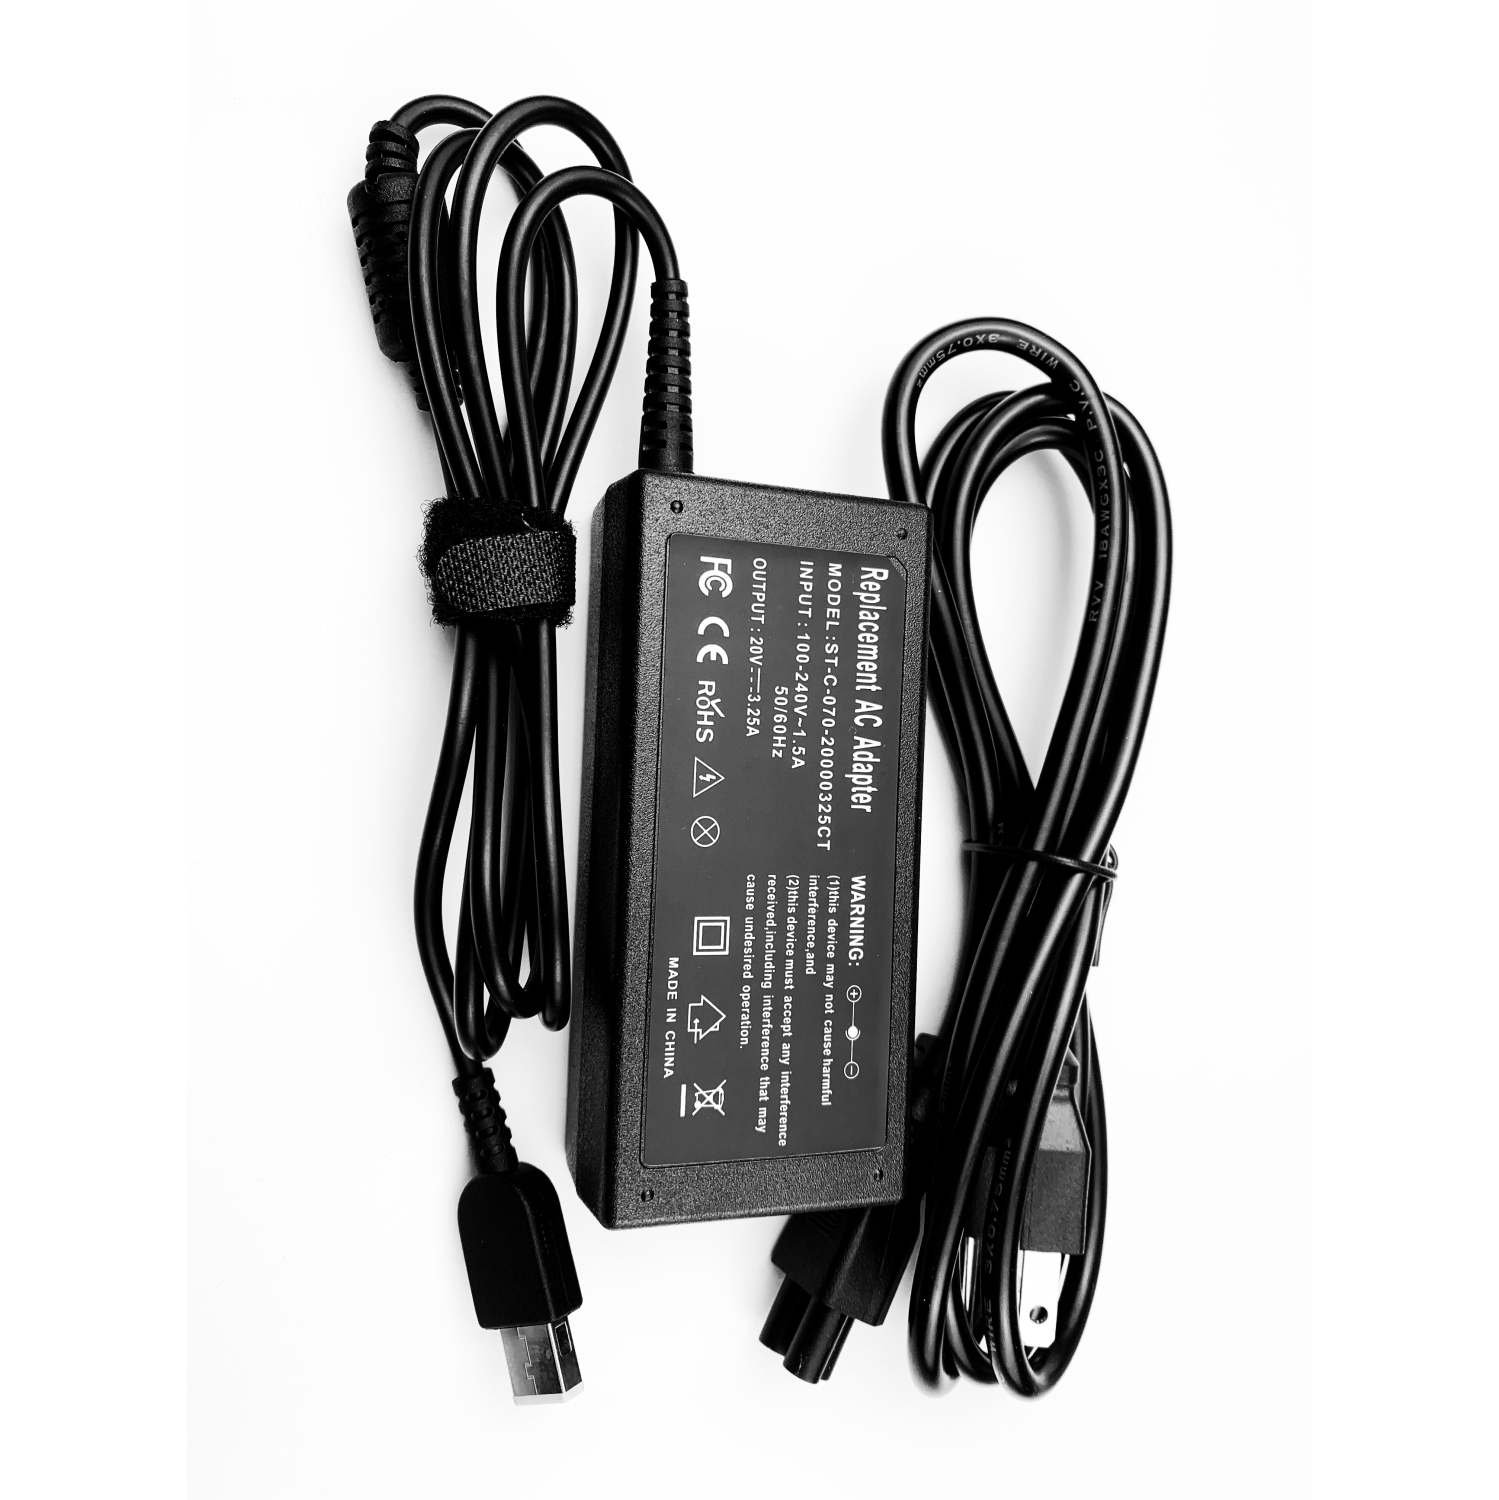 65W AC adapter charger power cord for Lenovo IdeaPad B50-30 B50-35 B50-45 B50-70